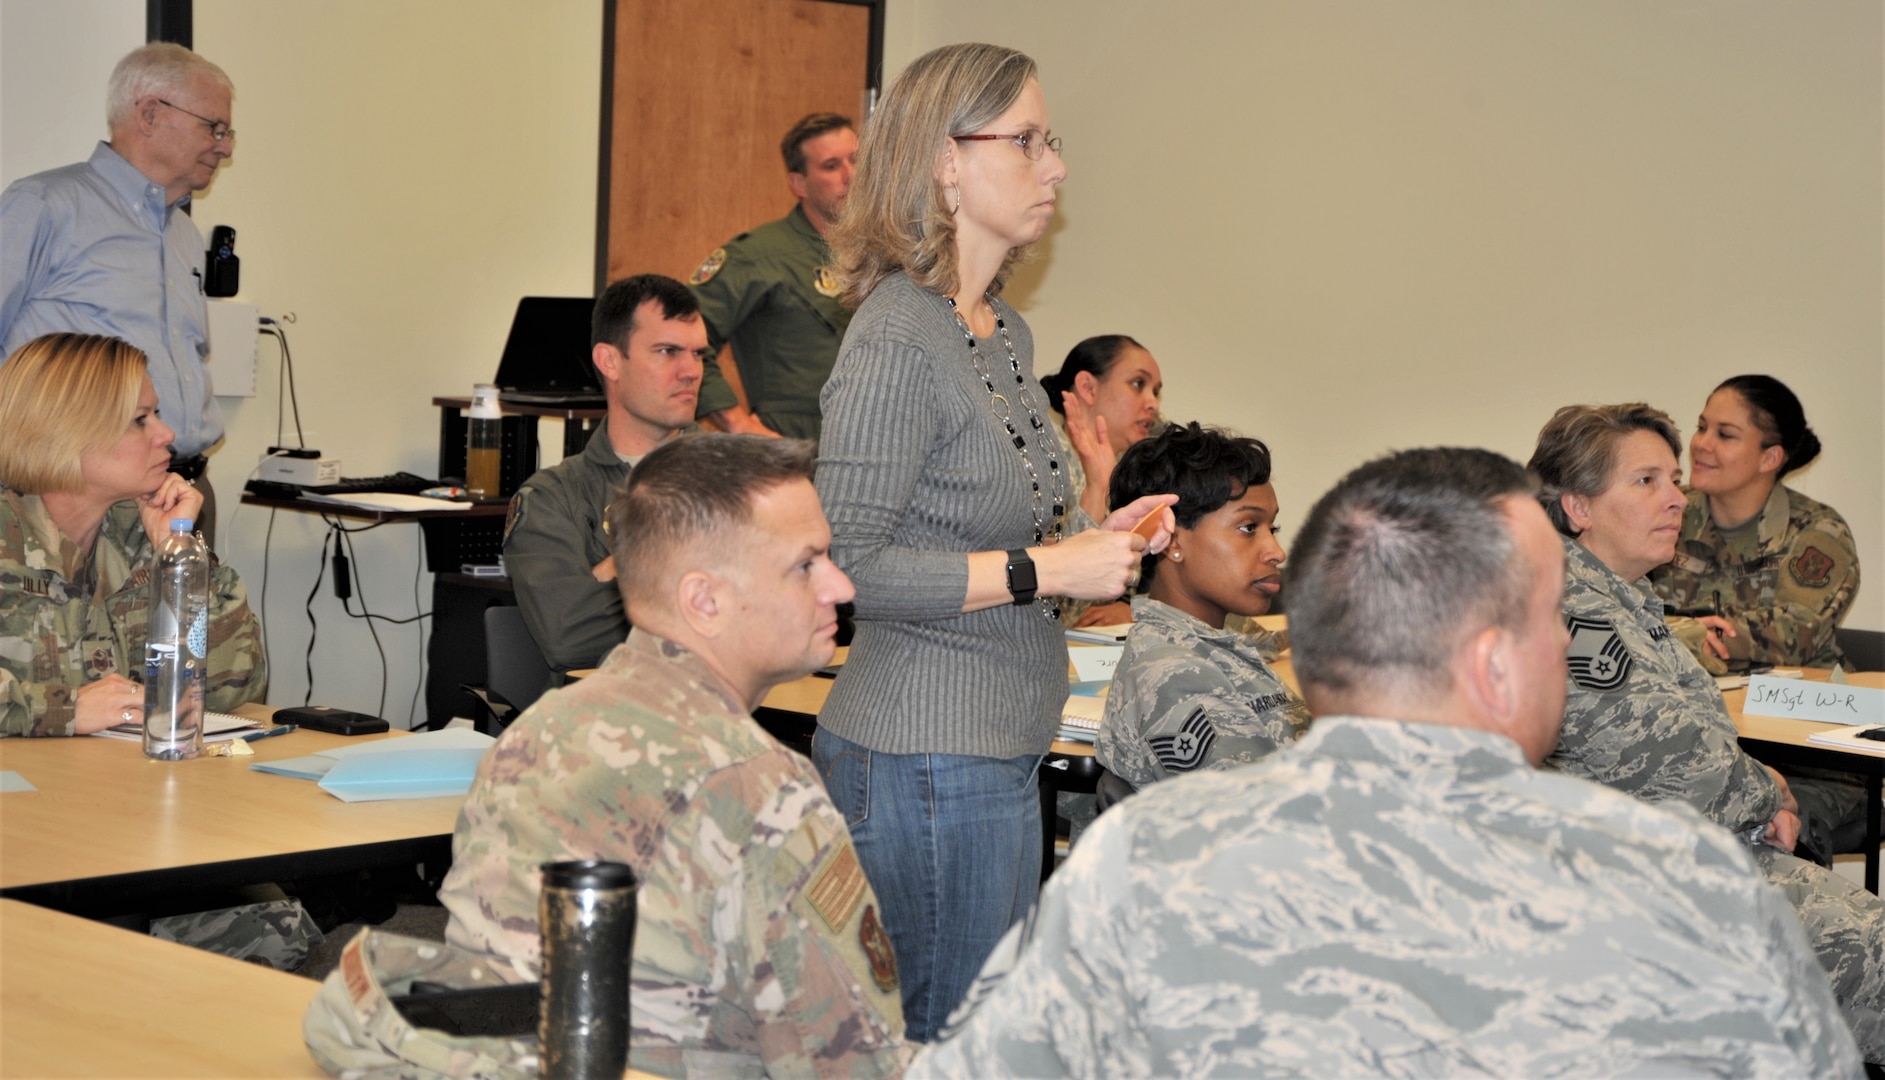 Teresa Davies, 340th Flying Training Group continuous improvement manager, briefs 340th Flying Training Group members gathered at Joint Base San Antonio-Randolph, Texas Nov. 19-21 for a Continuous process improvement event to address pay issues that occur when Reserve members transition between pay statuses as Davies’ improvement process mentor, Bob Daffin from the Air Force Reserve Command at Robins Air Force Base, Ga. looks on. (U.S. Air Force photo by Debbie Gildea)